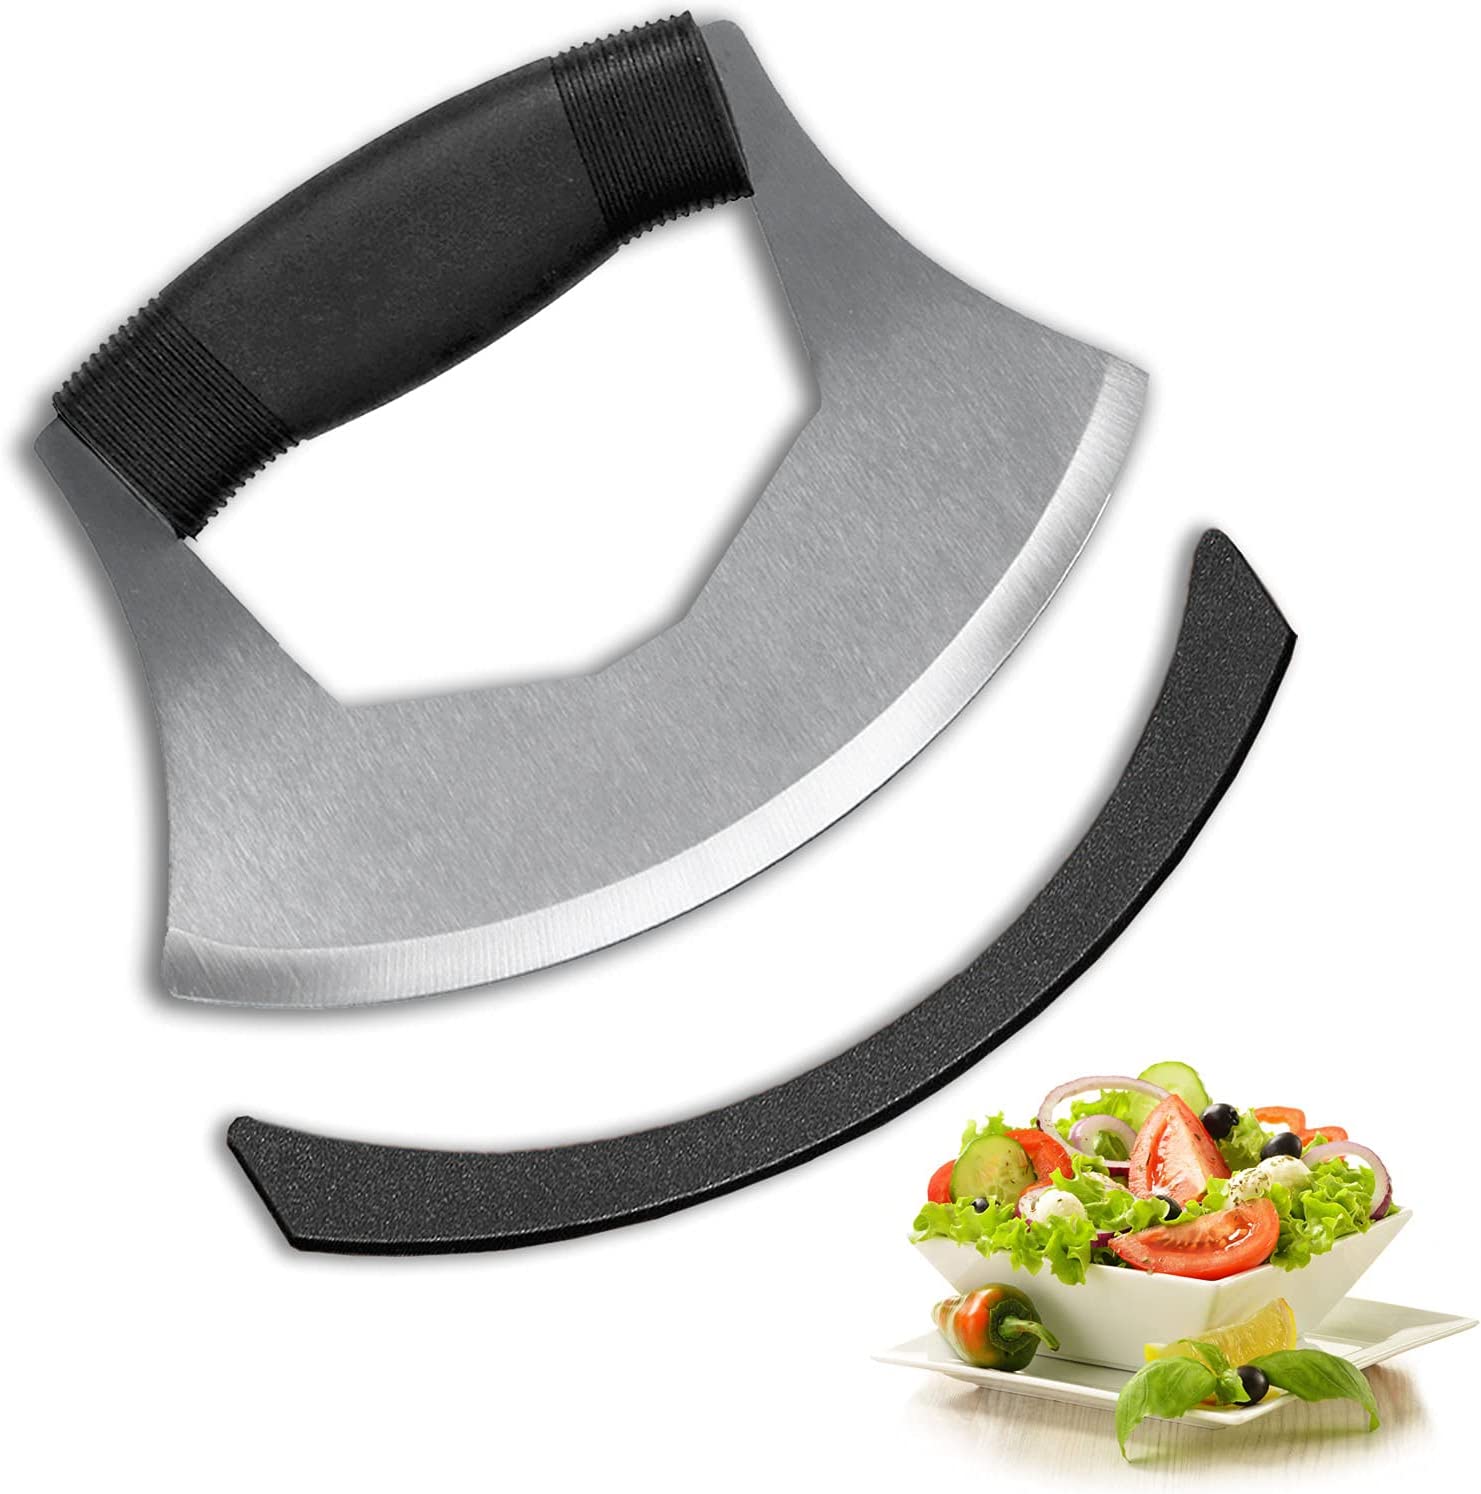 Mezzaluna Knife Salad Chopper, Stainless Steel Blade with Protective Cover – Ergonomic Anti-Slip Handle Vegetable Chopper Mincing Knife for Pizza, Cheese, Onion, Carrot, Pepper, Garlic, Vegetable